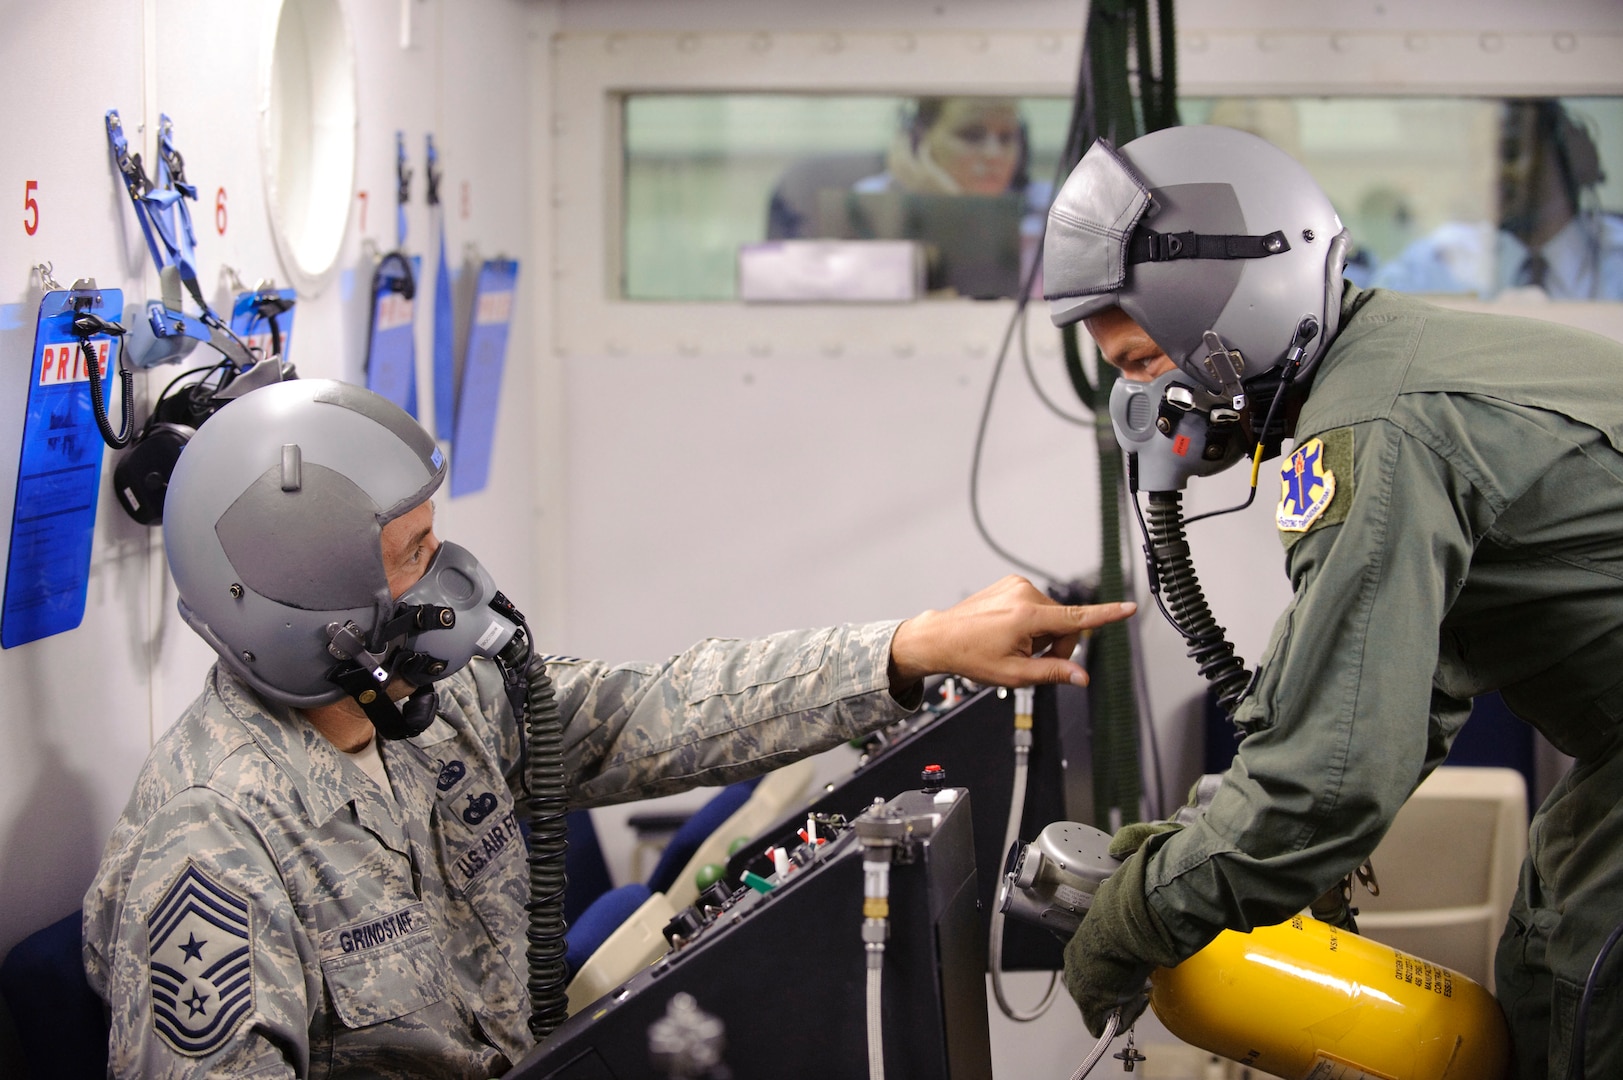 Chief Master Sgt. Max Grindstaff 12th Flying Training Wing command chief from Randolph Air Force Base, Texas questions Tech. Sgt. Mike Stegen, an aerospace physiology technician with the 12th Medical Group  about the equipment used for delivering oxygen during training in the bases high altitude chamber. (U.S. Air Force photo/Steve Thurow)